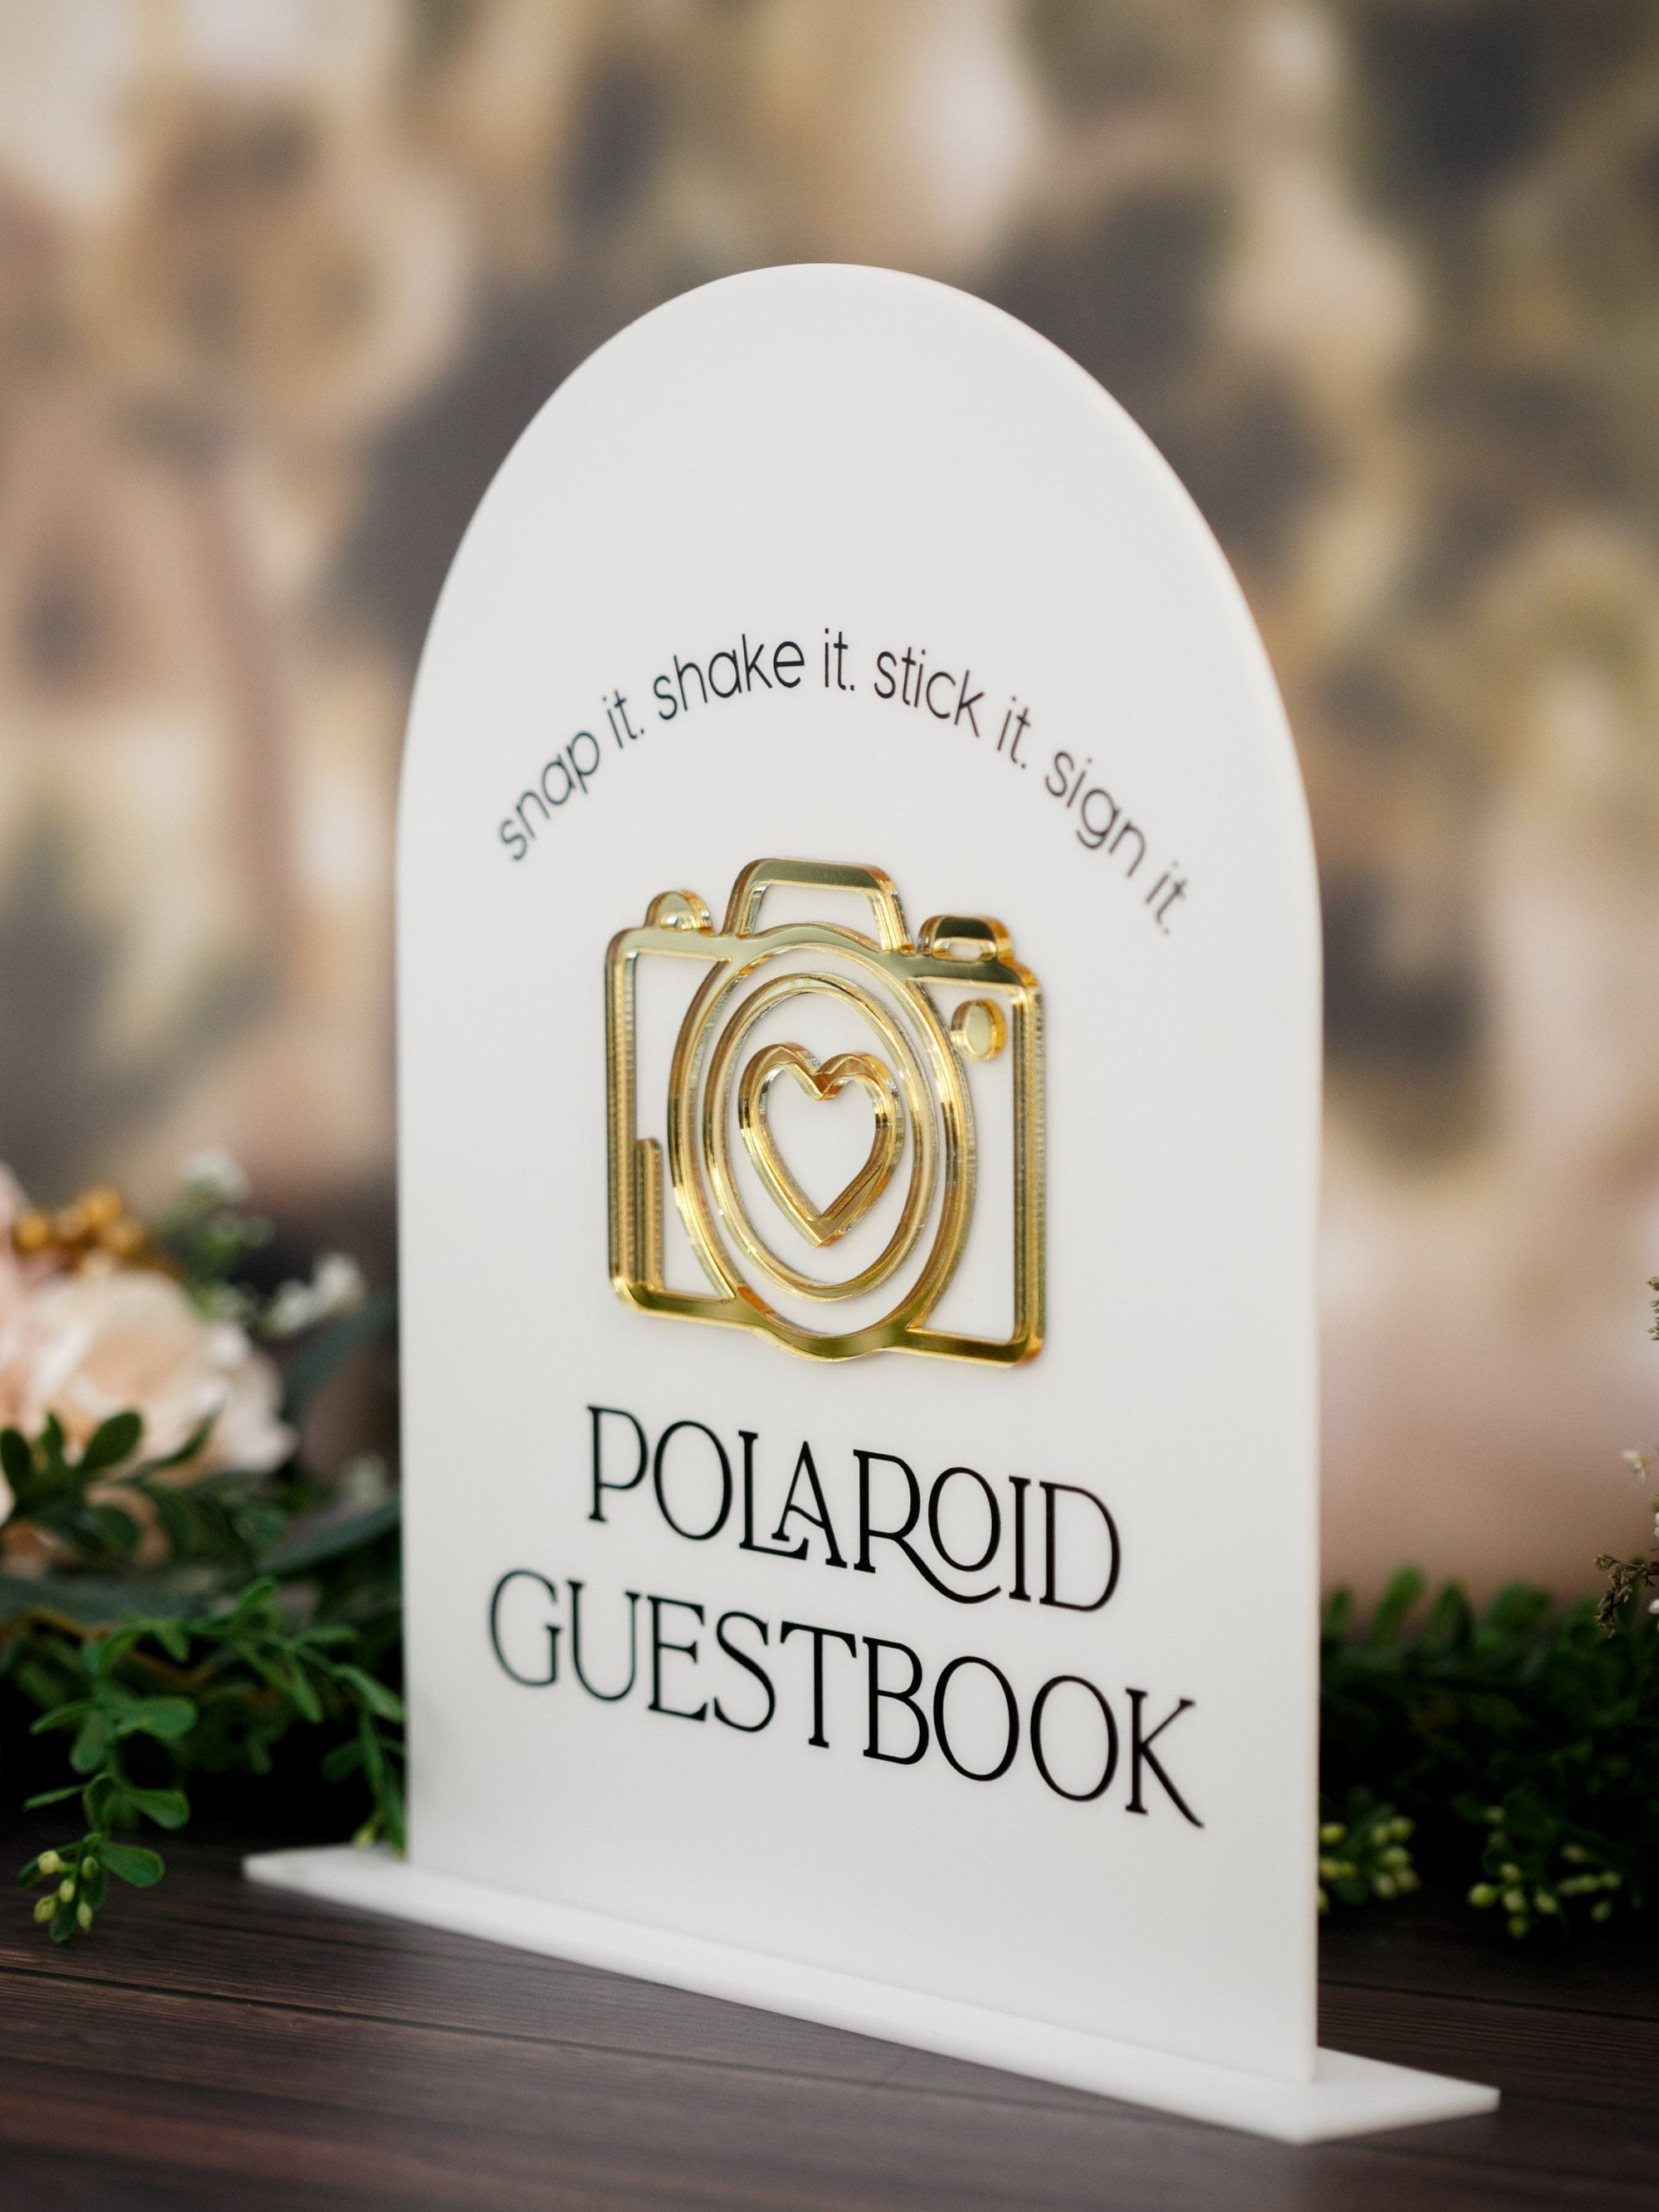 Polaroid Guestbook Snap It Stick It Sign It Clear Glass Look Acrylic Wedding Guest Book Sign, Acrylic Gold Photo Guest Book Lucite